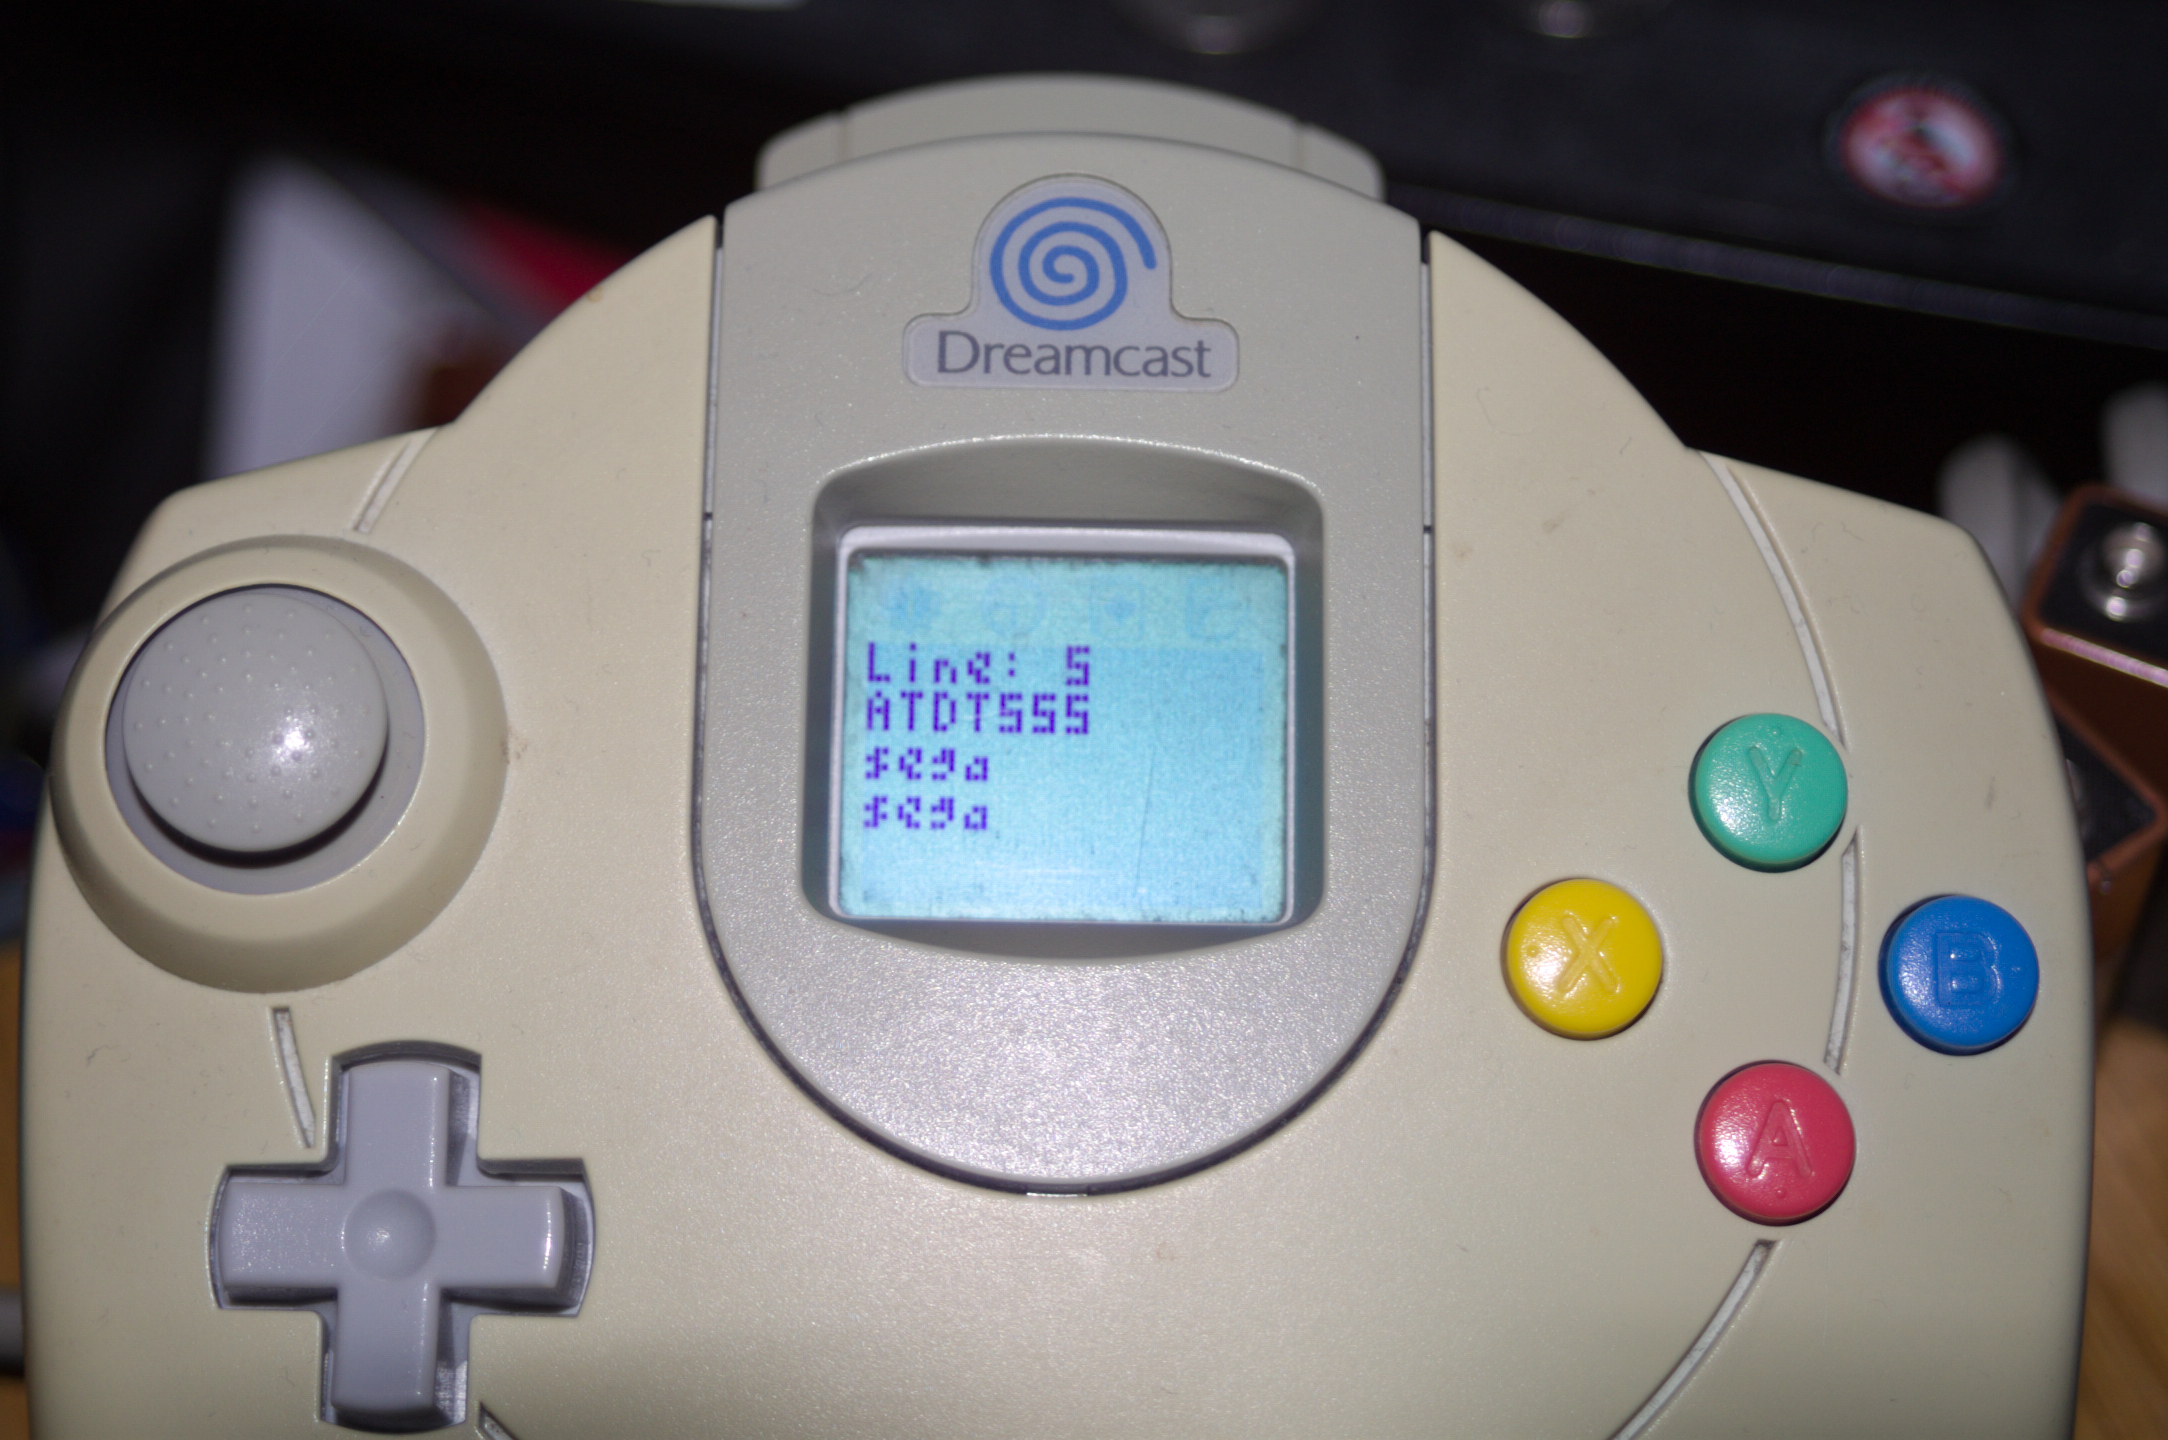 PPP connection debug information on a VMU